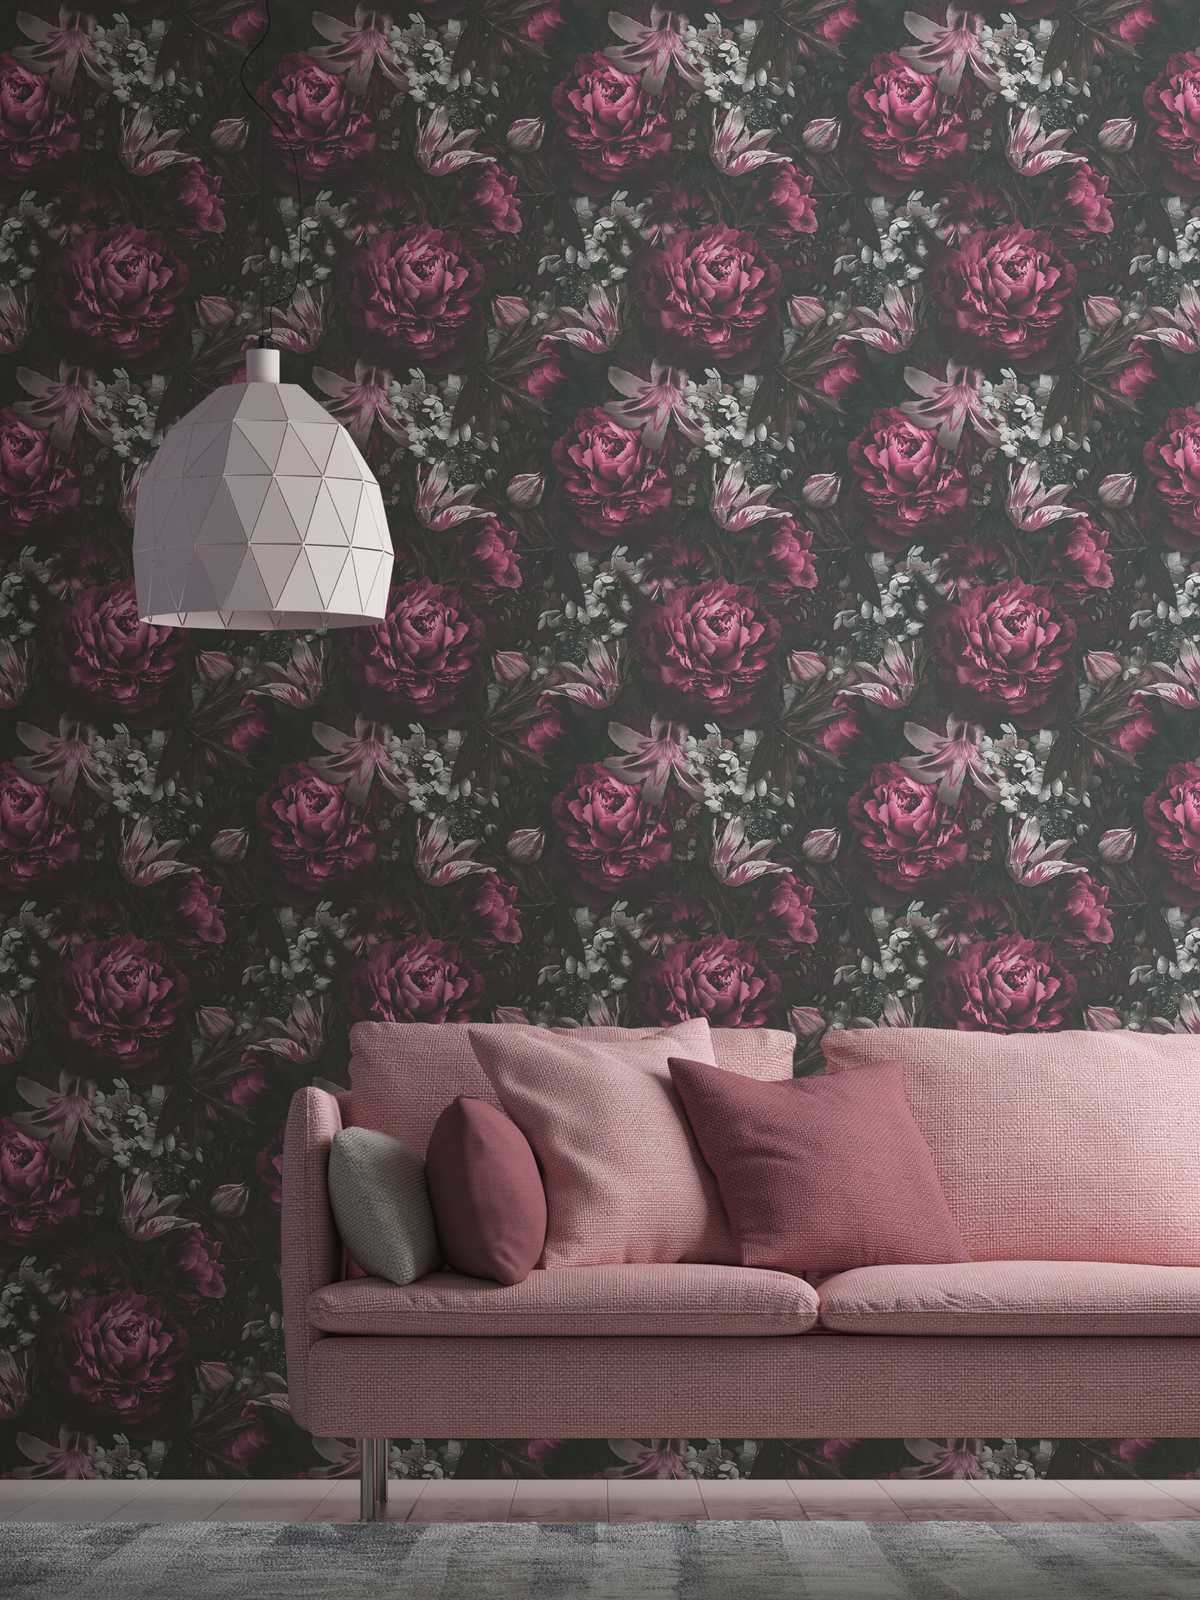             wallpaper roses & tulips in classic style - pink, grey
        